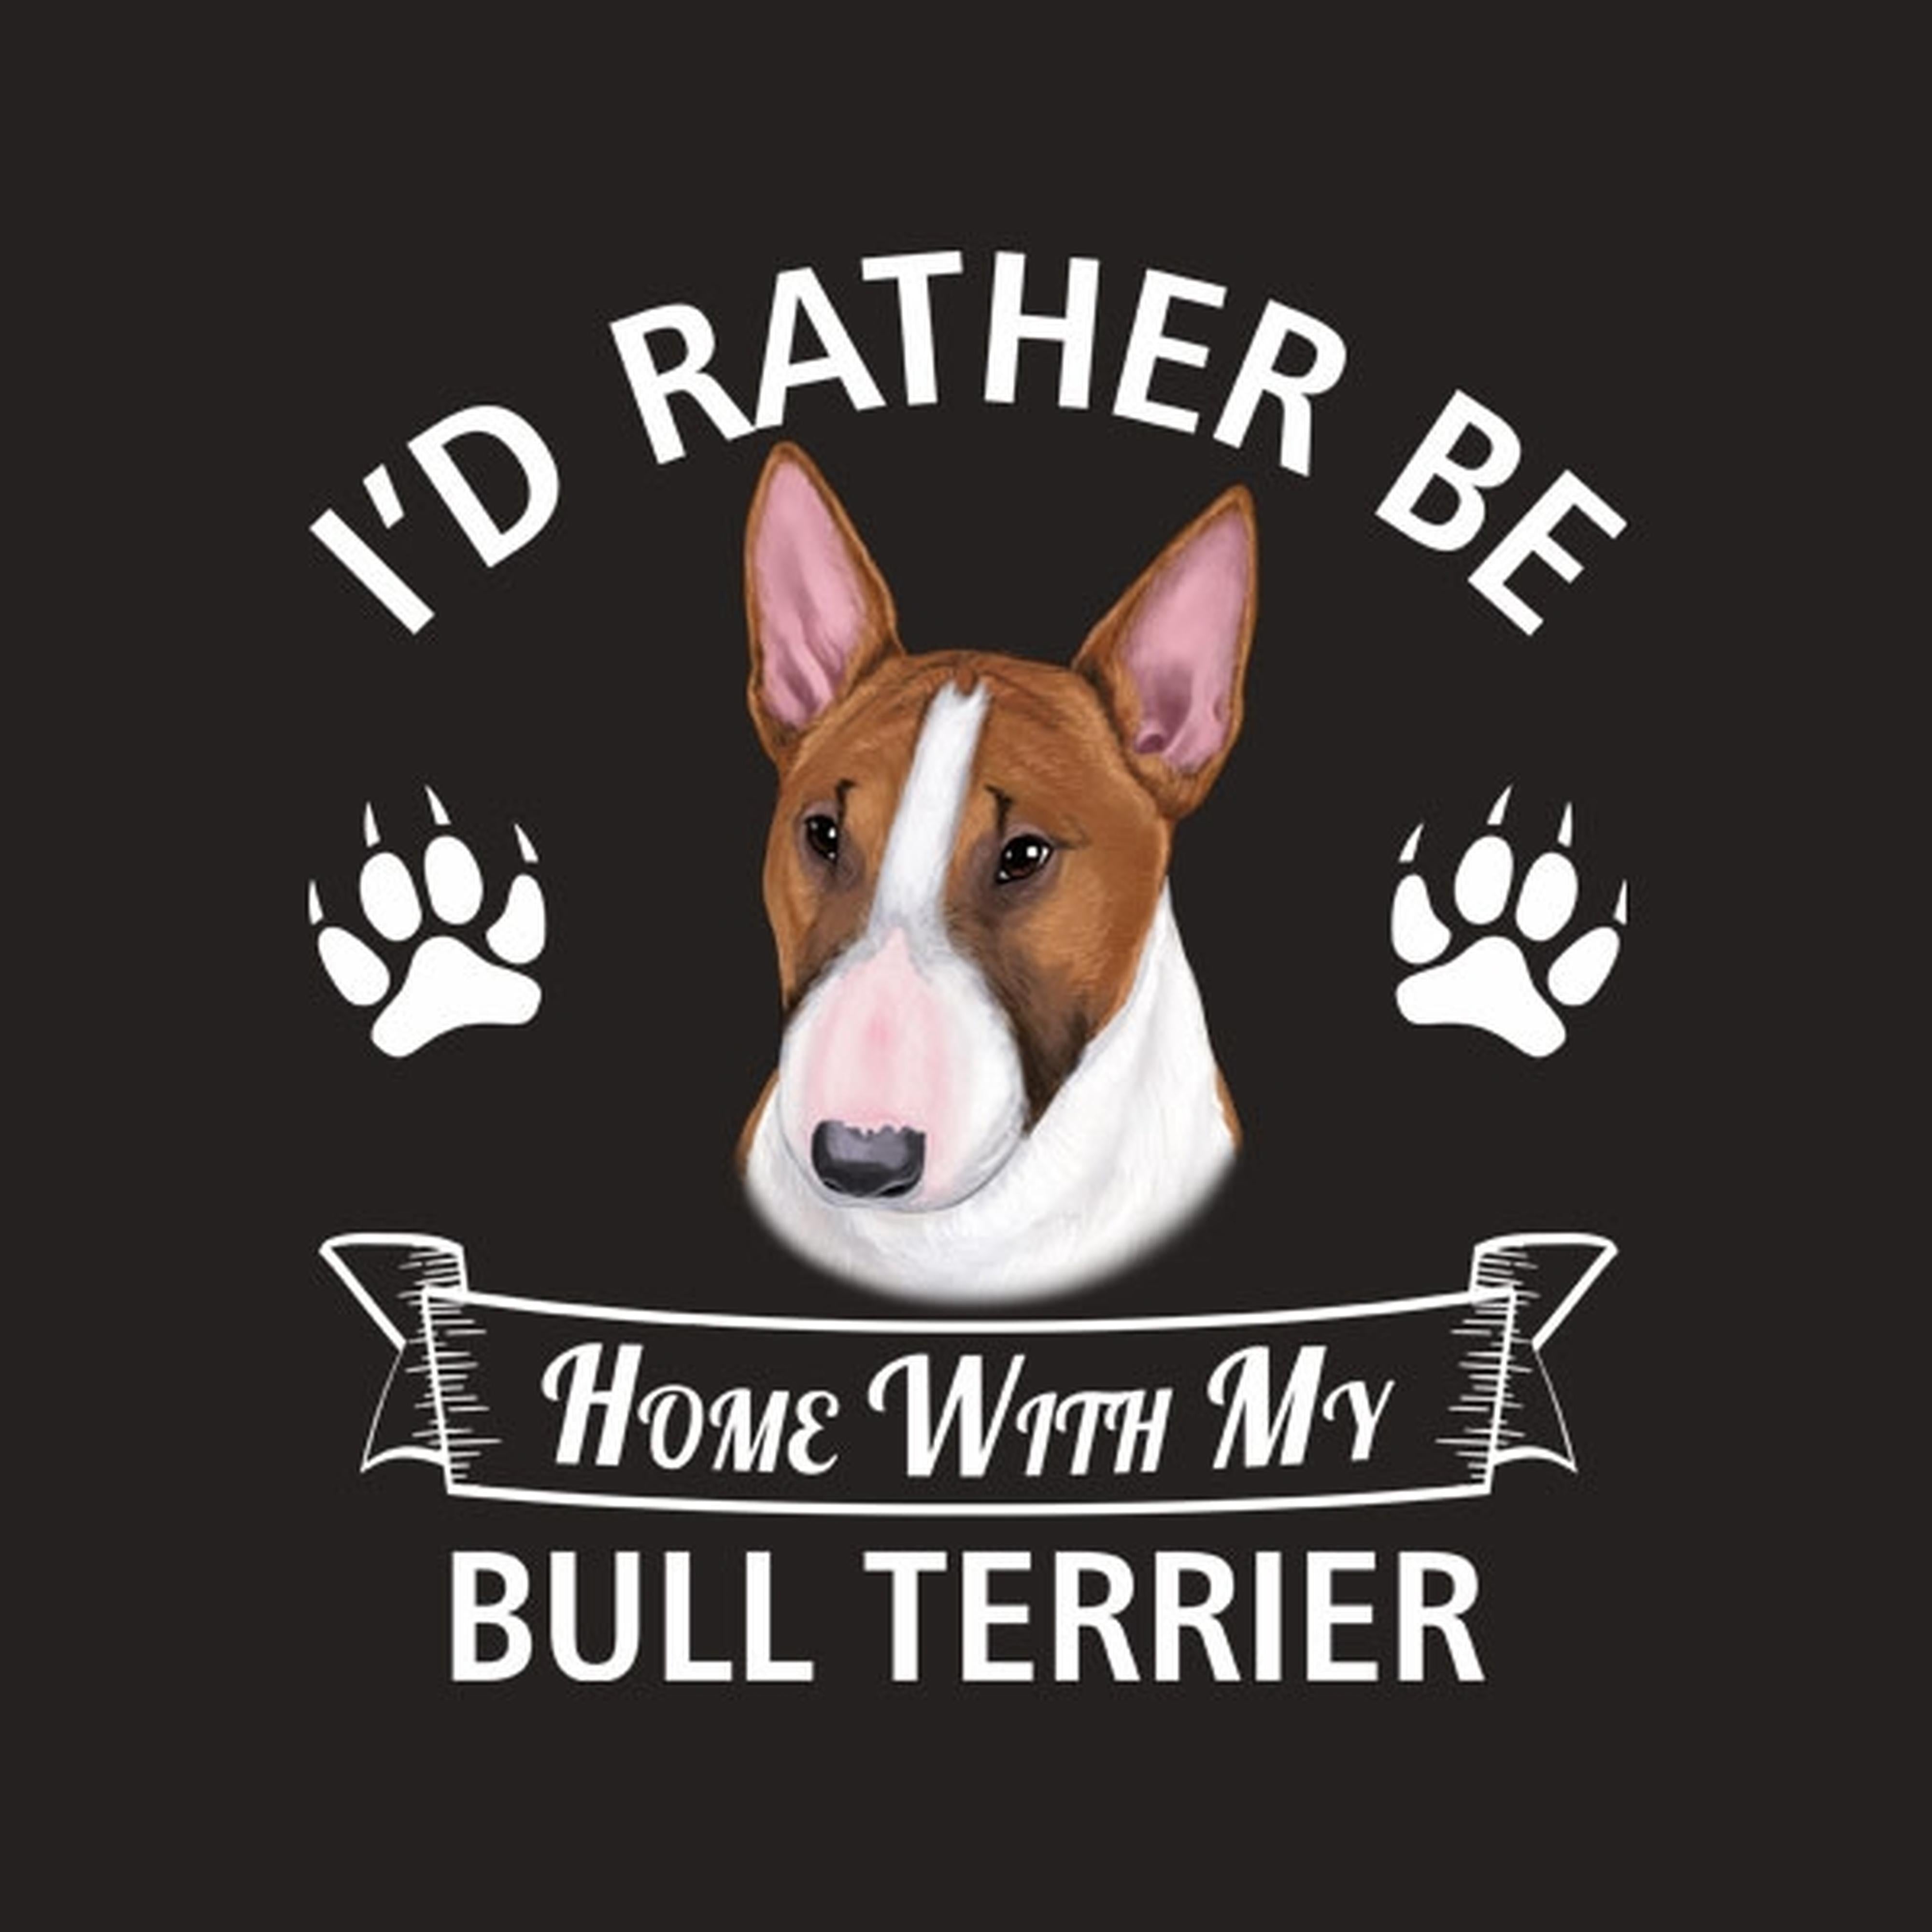 I'd rather stay home with my Bull Terrier - T-shirt